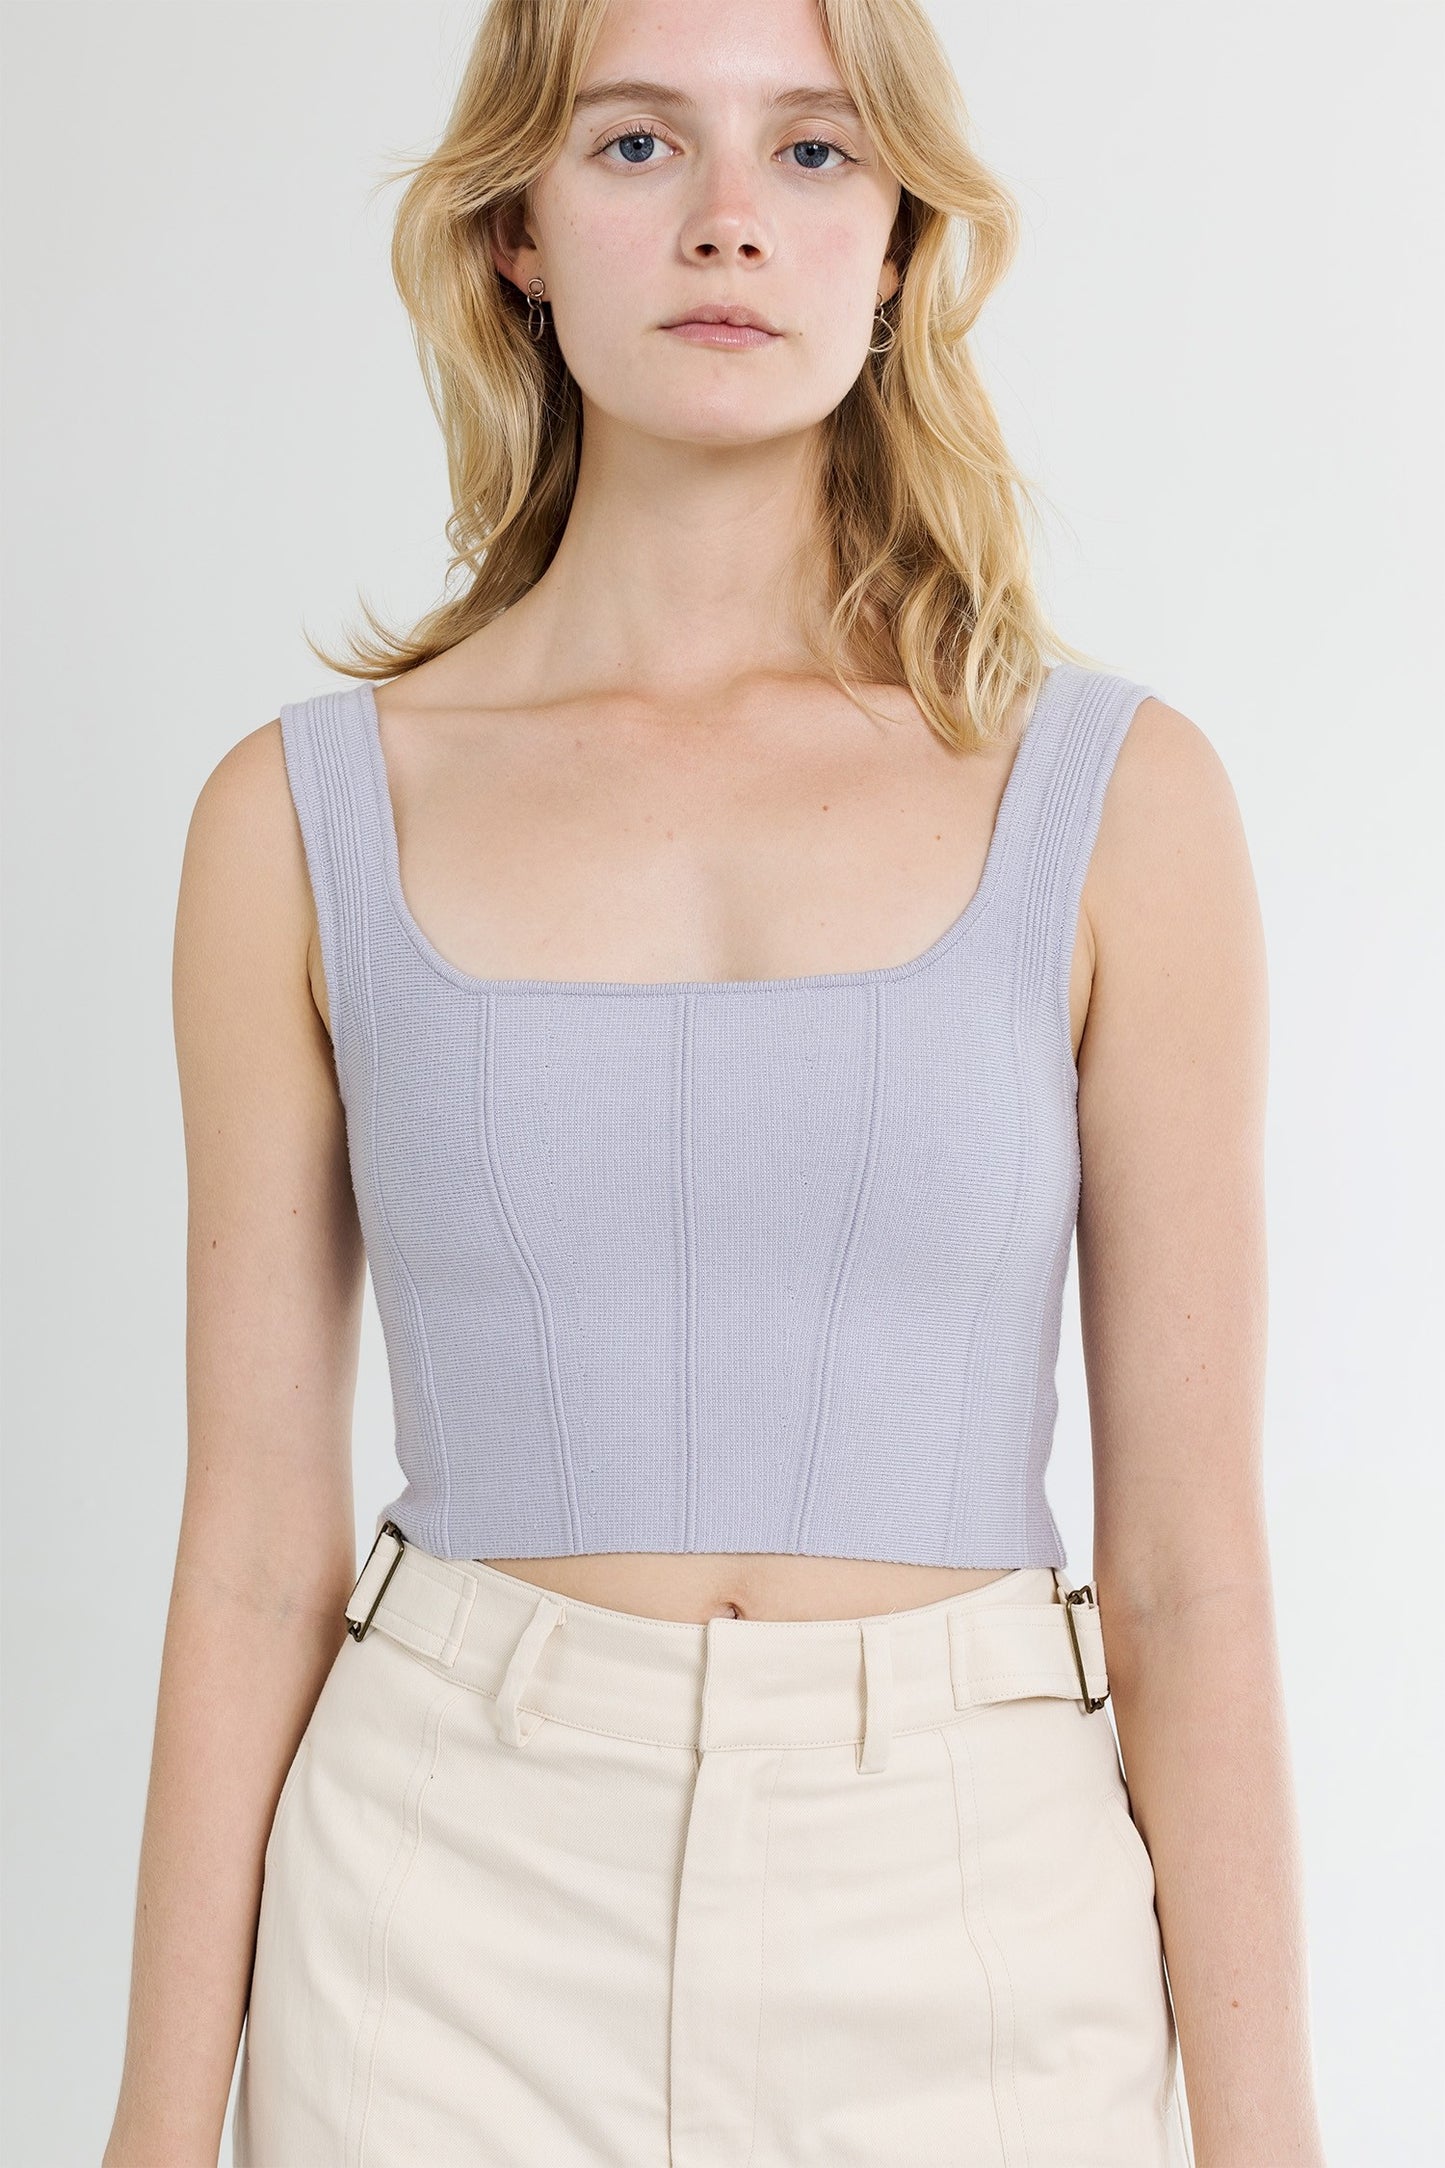 All : Row, The Millie Top in Lavender - Boutique Dandelion